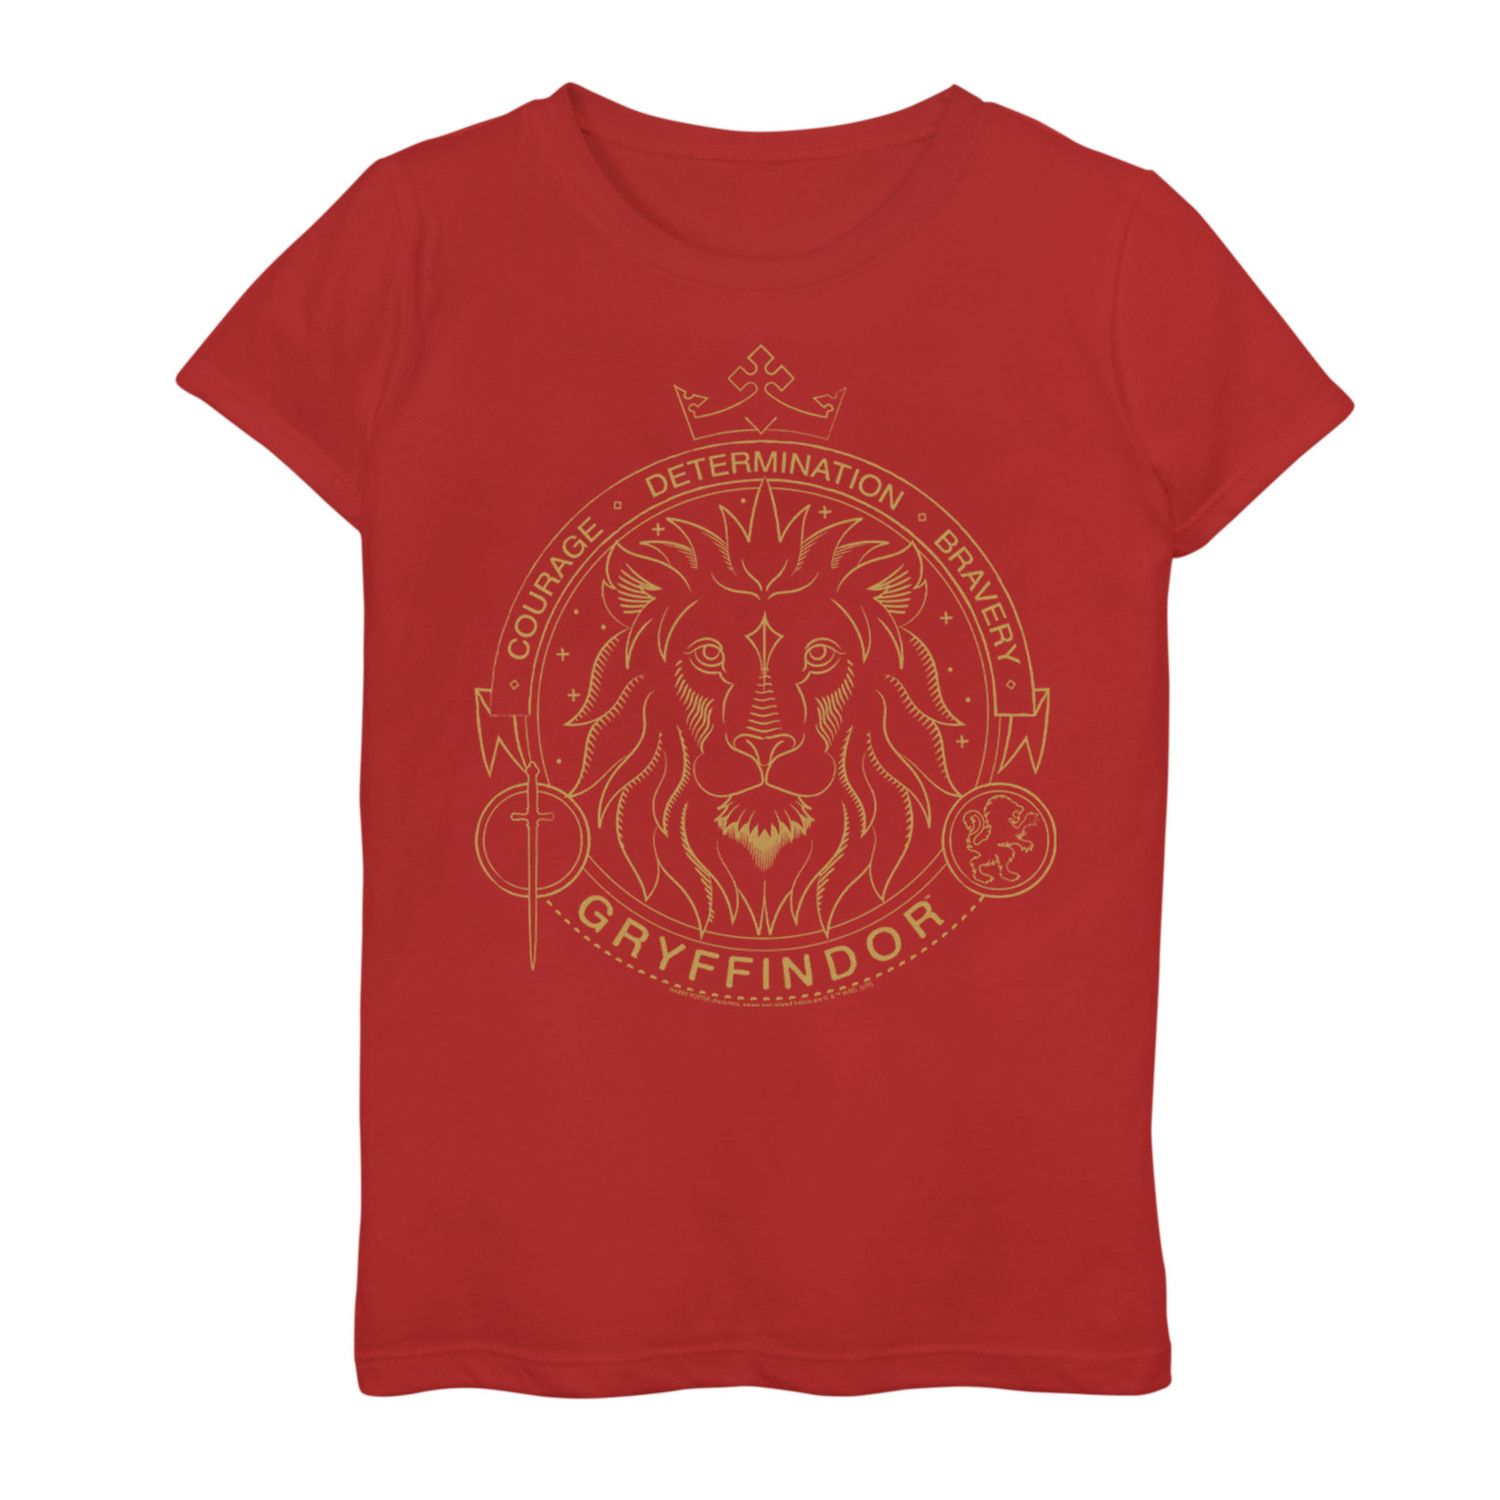 Image for Harry Potter Girls 7-16 Gryffindor Line Graphic Tee at Kohl's.